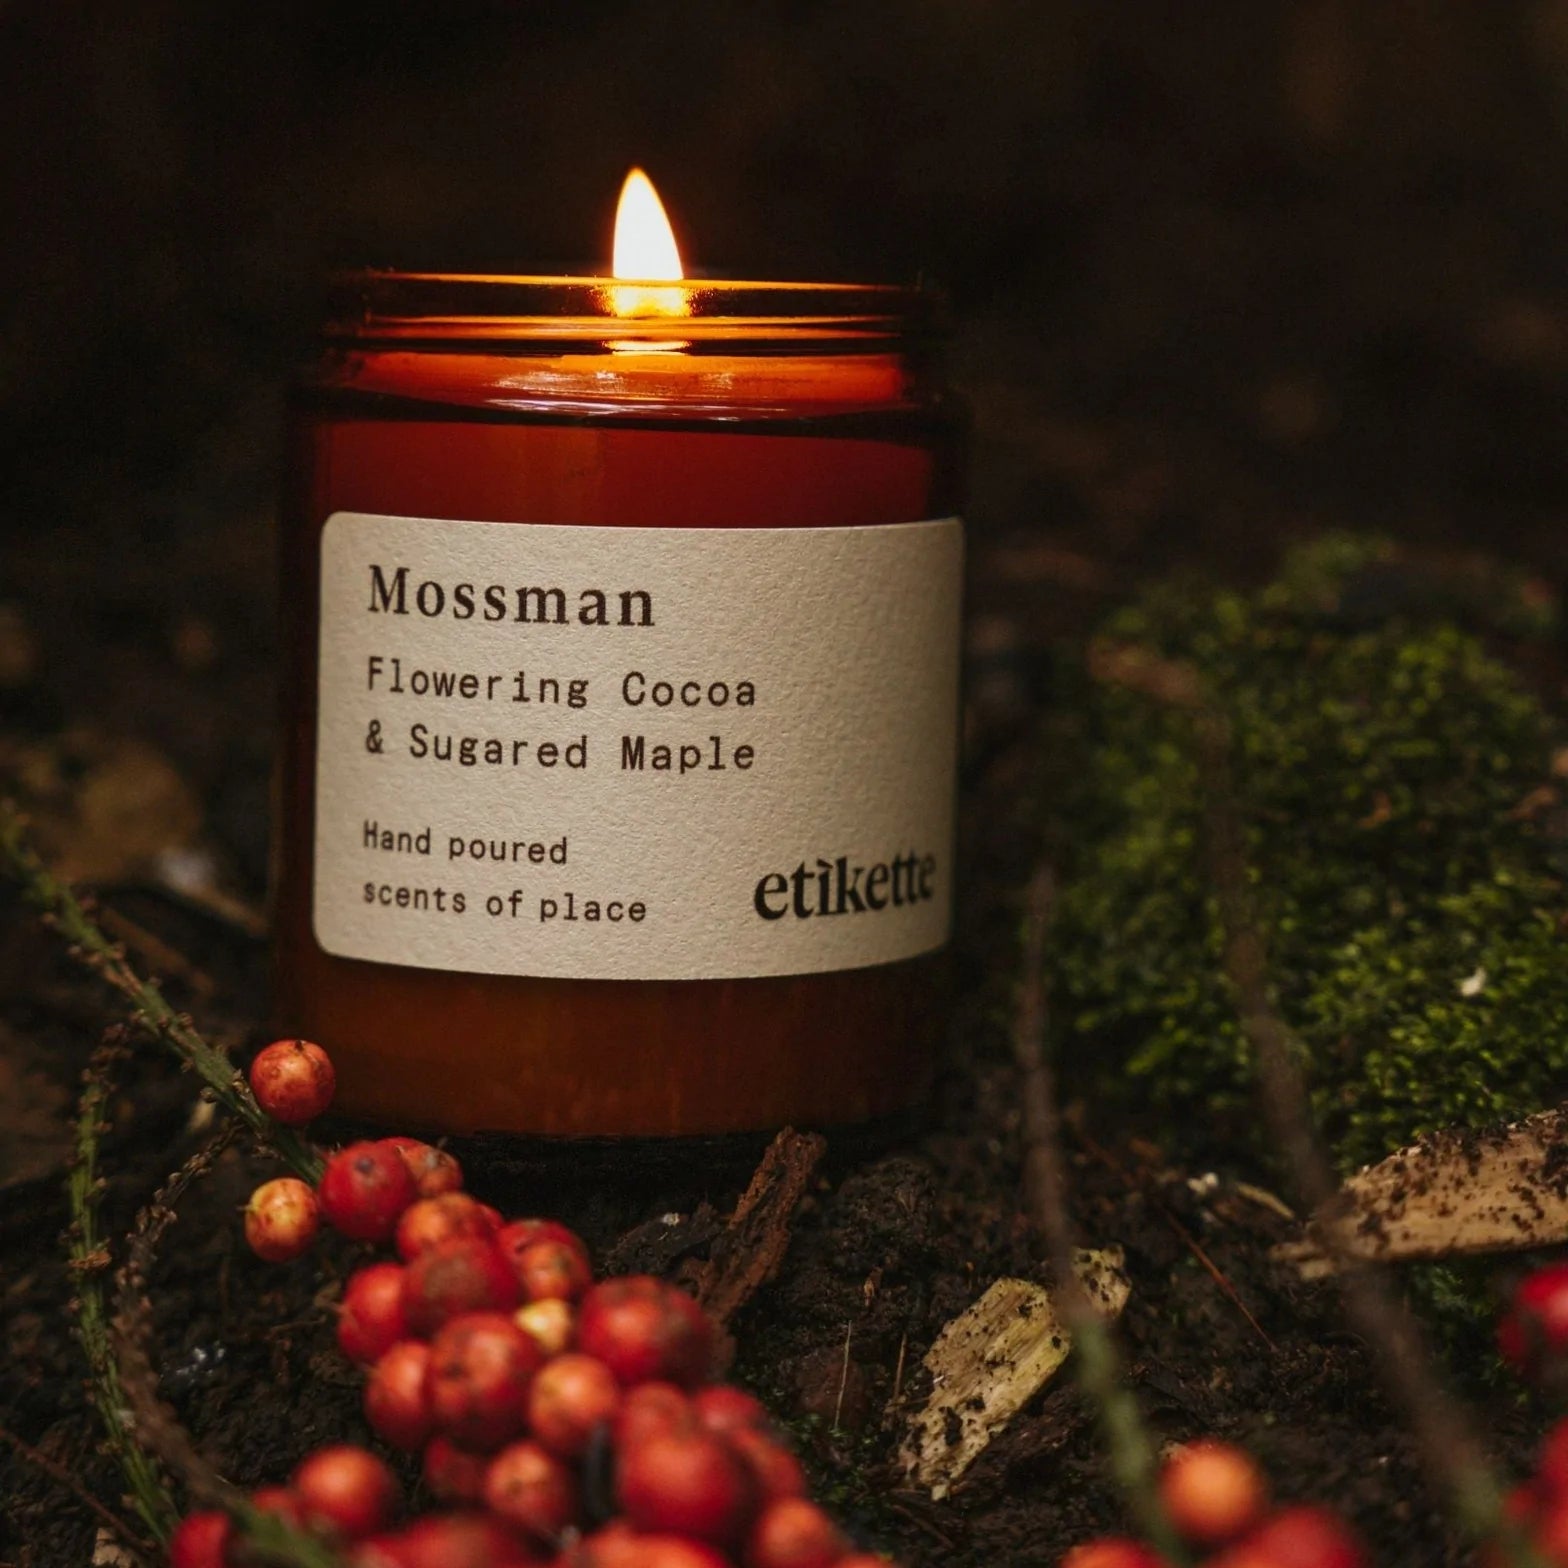 Mossman Flowering Cocoa & Sugared Maple Small by Etikette - Toast and honey studio